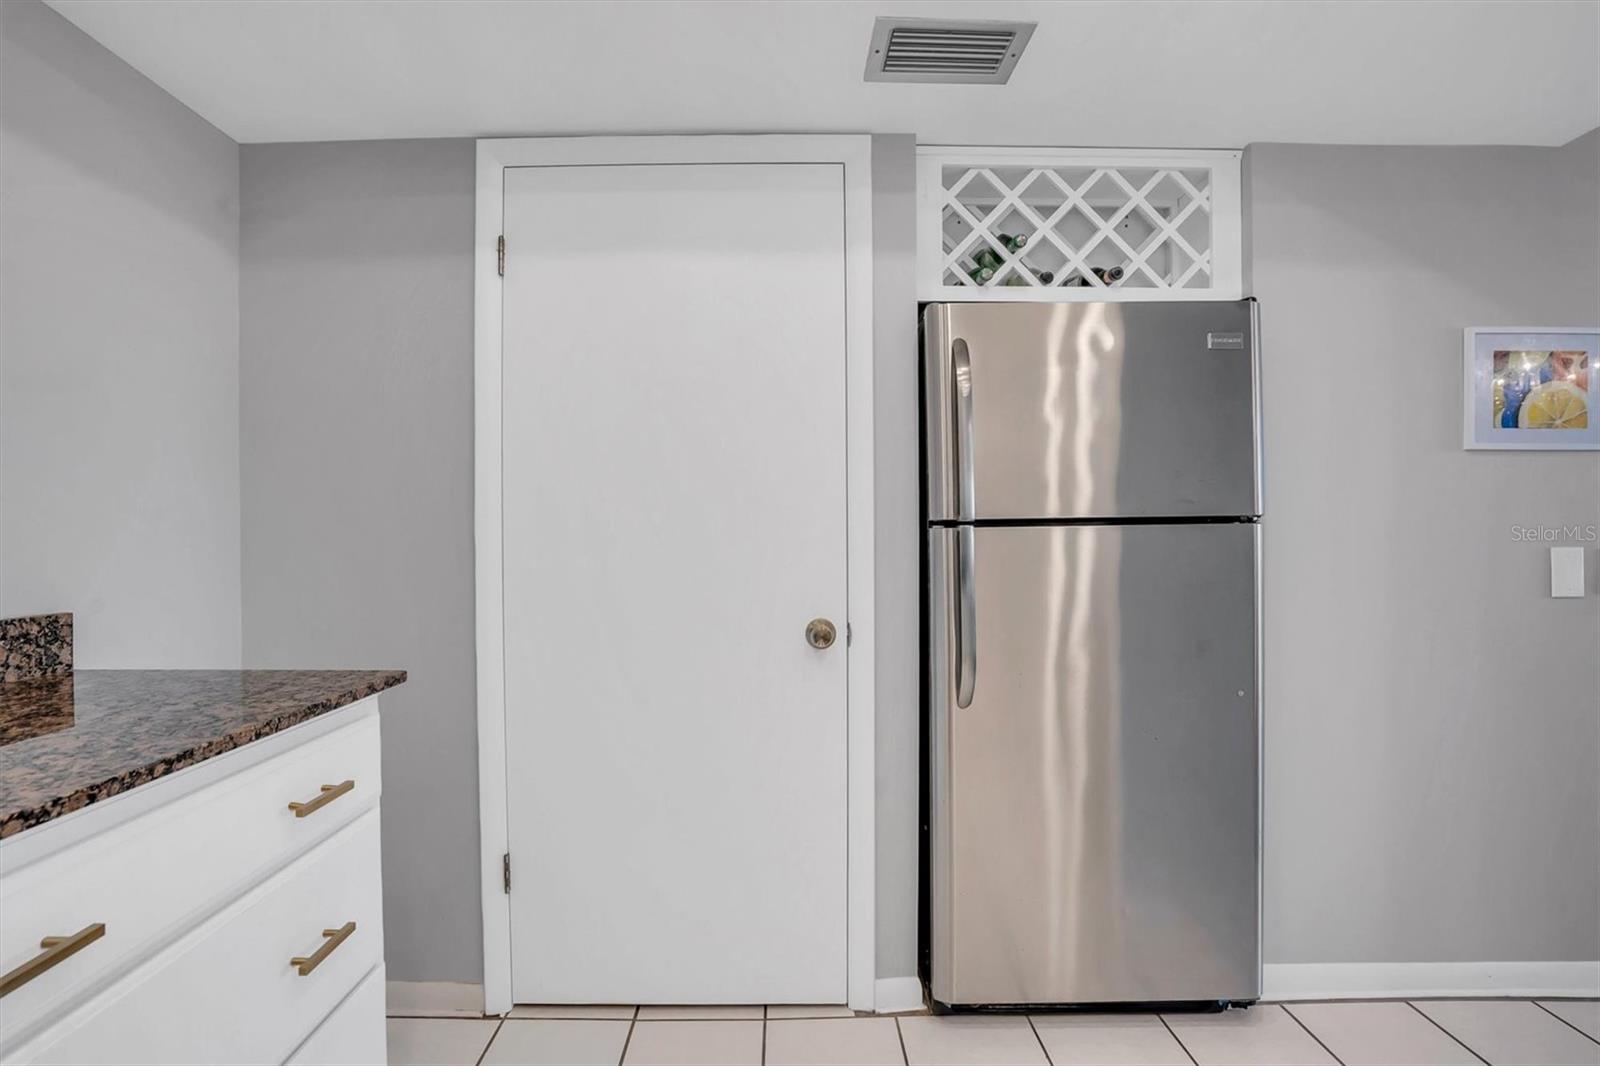 Kitchen has Pantry and Wine Storage Above Refrigerator